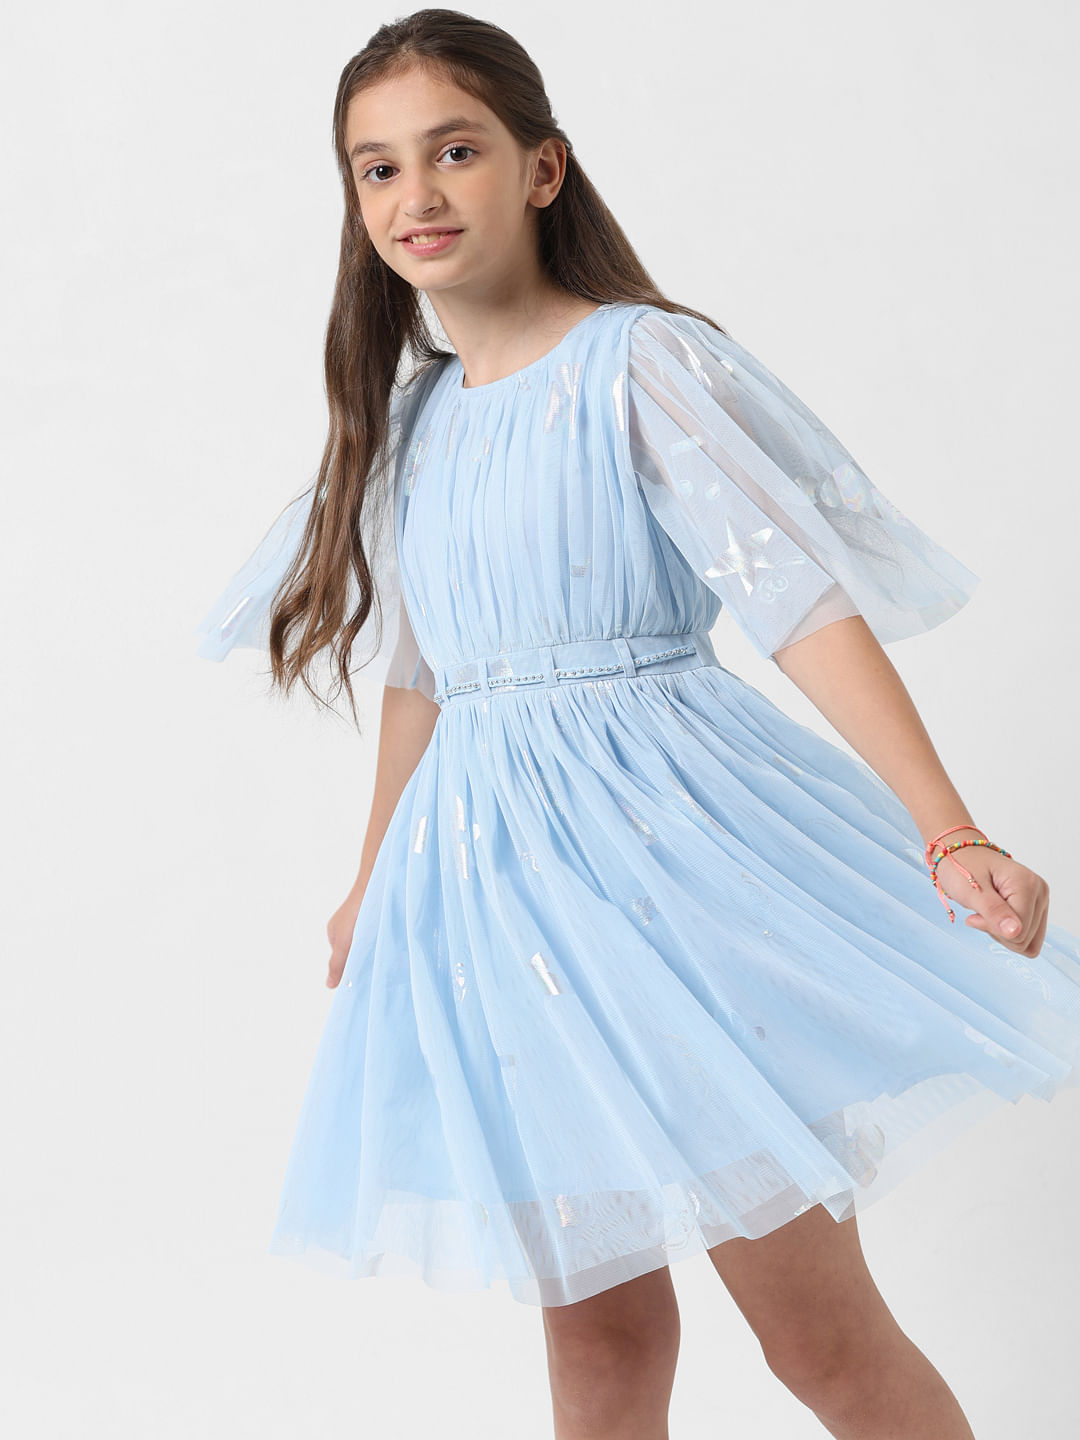 Happiest Girl In The Room Shift Dress In Sky Blue • Impressions Online  Boutique